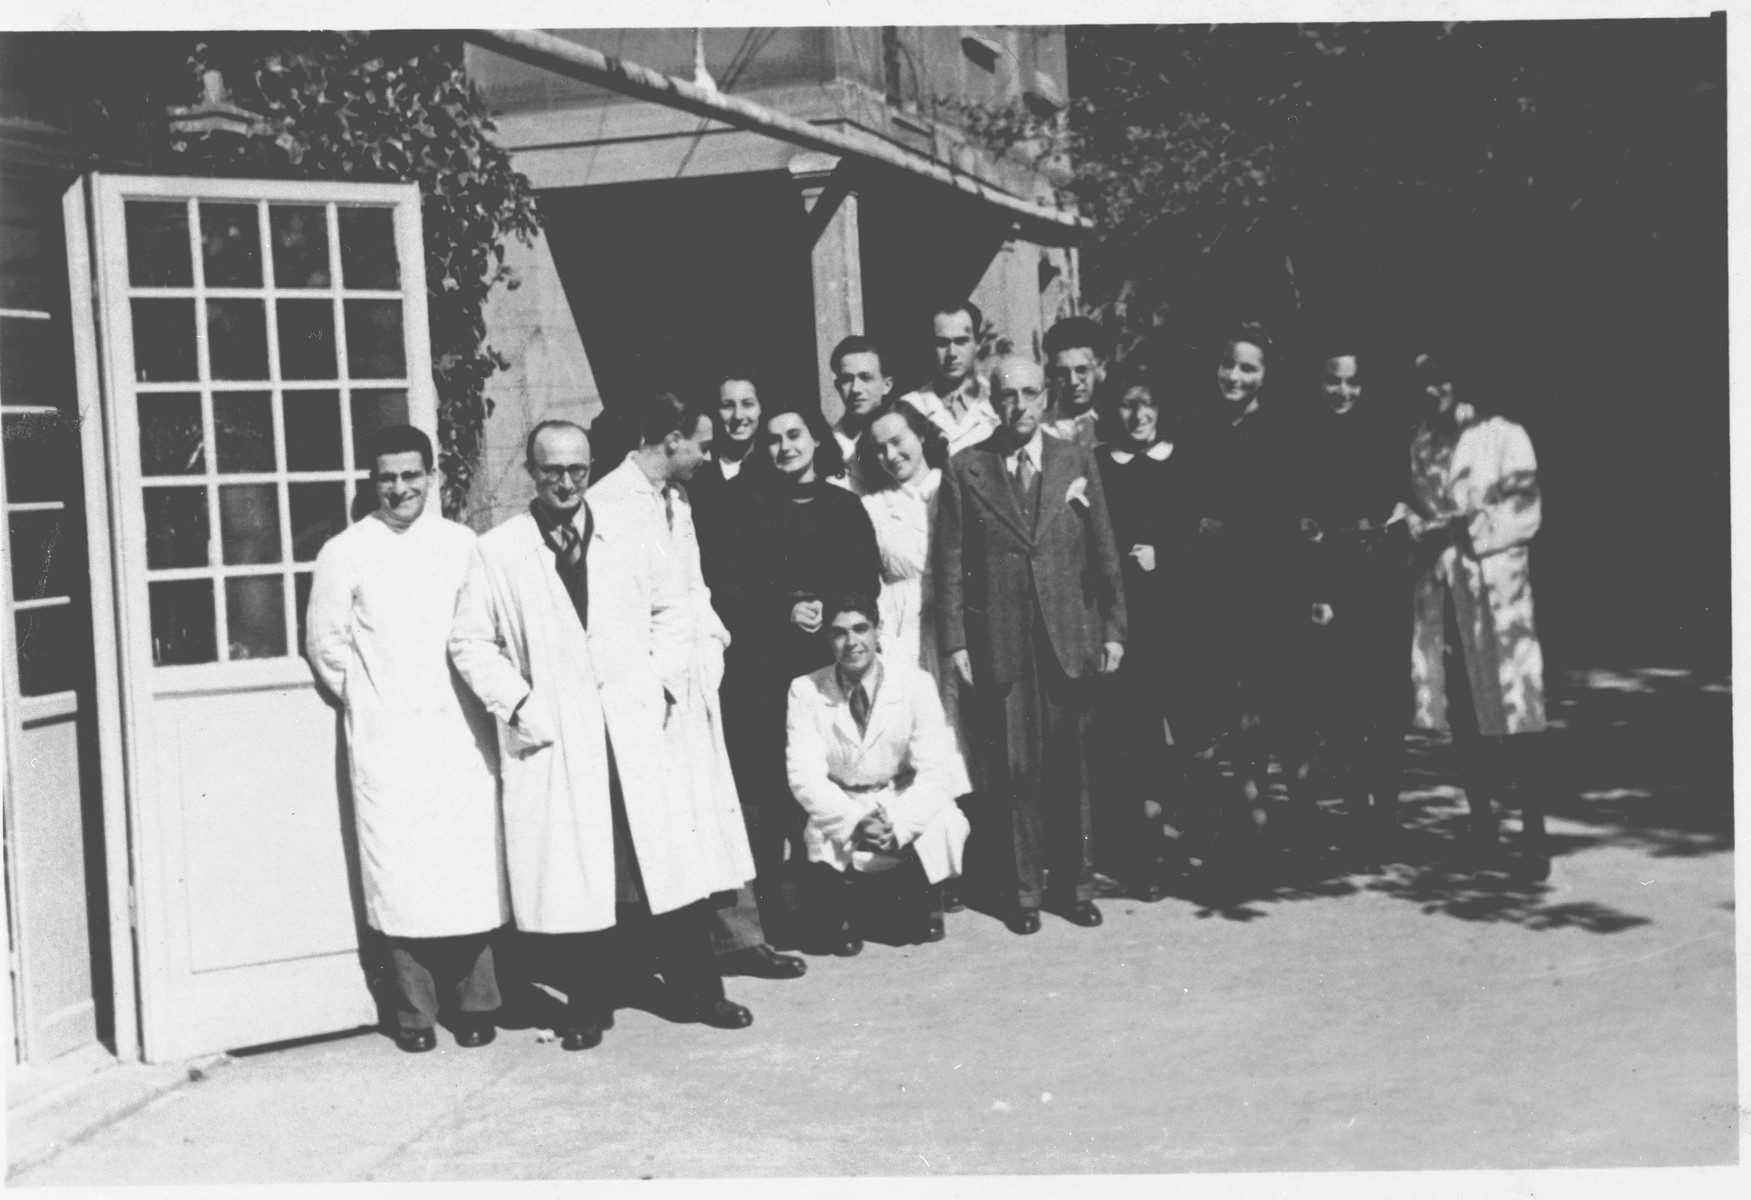 Students and faculty of the chemistry department of the Jewish high school in Milan stand in the school's courtyard.